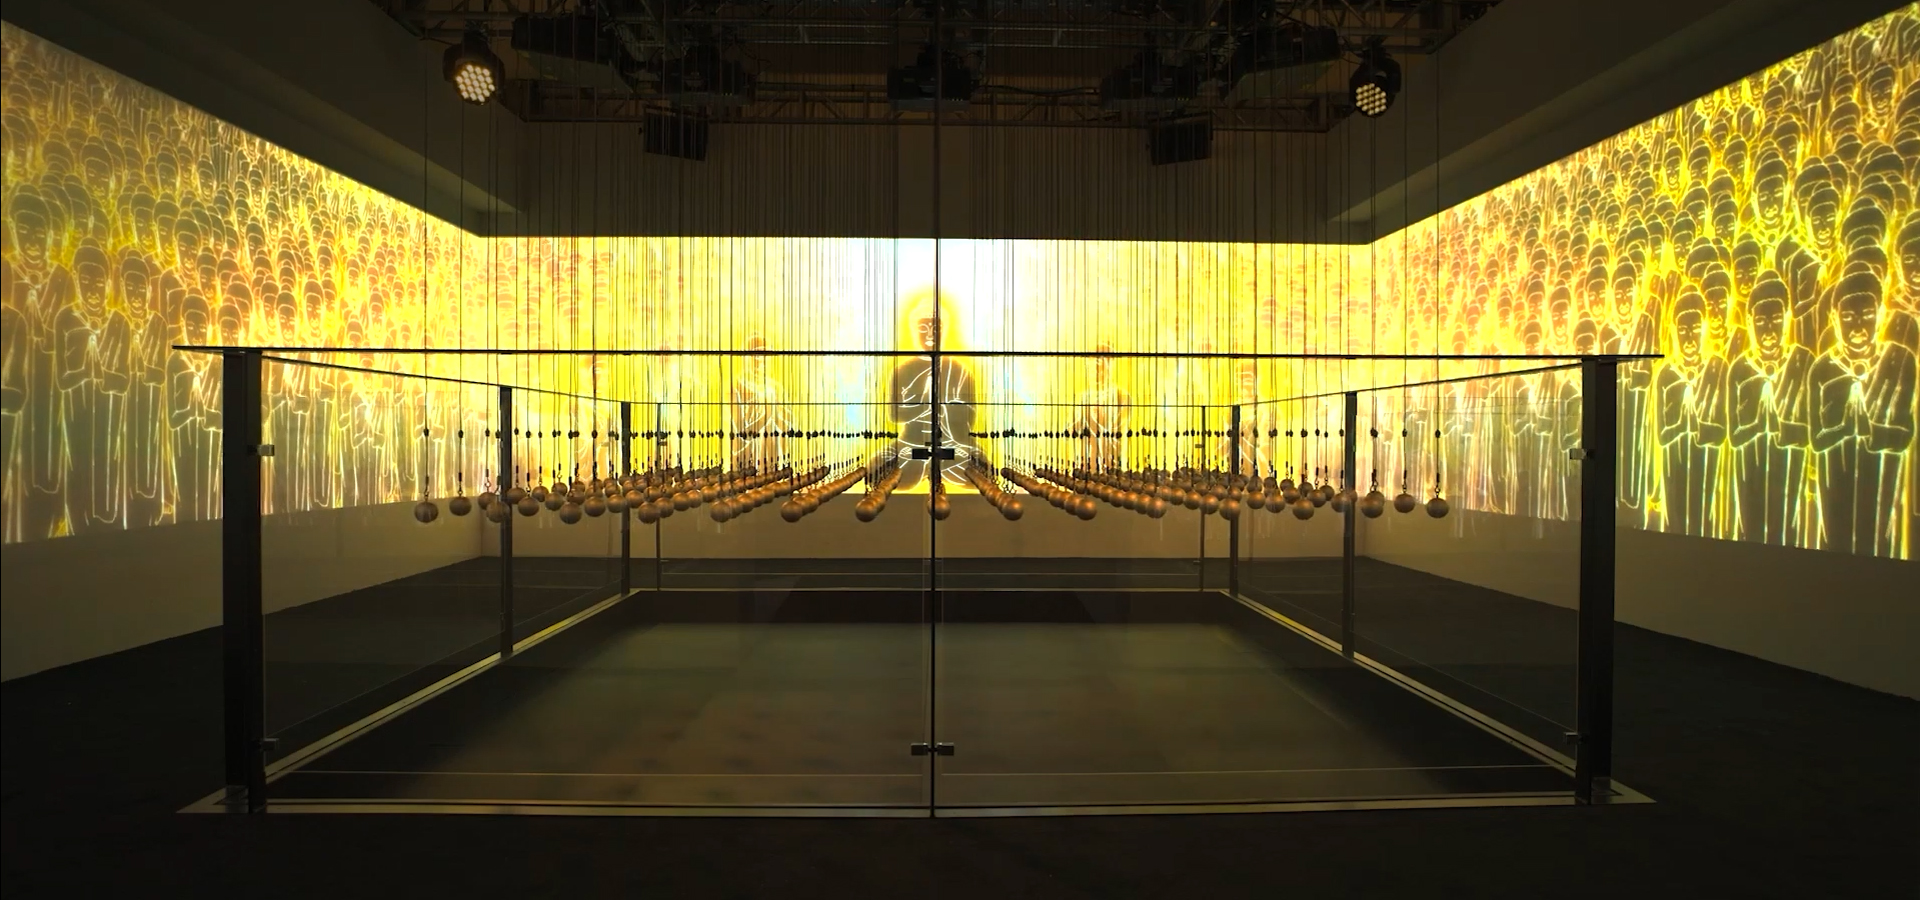 225 Sets Kinetic Sculpture were used in Special Exhibition on the 800th Anniversary of the Advent of Nichiren Daishonin